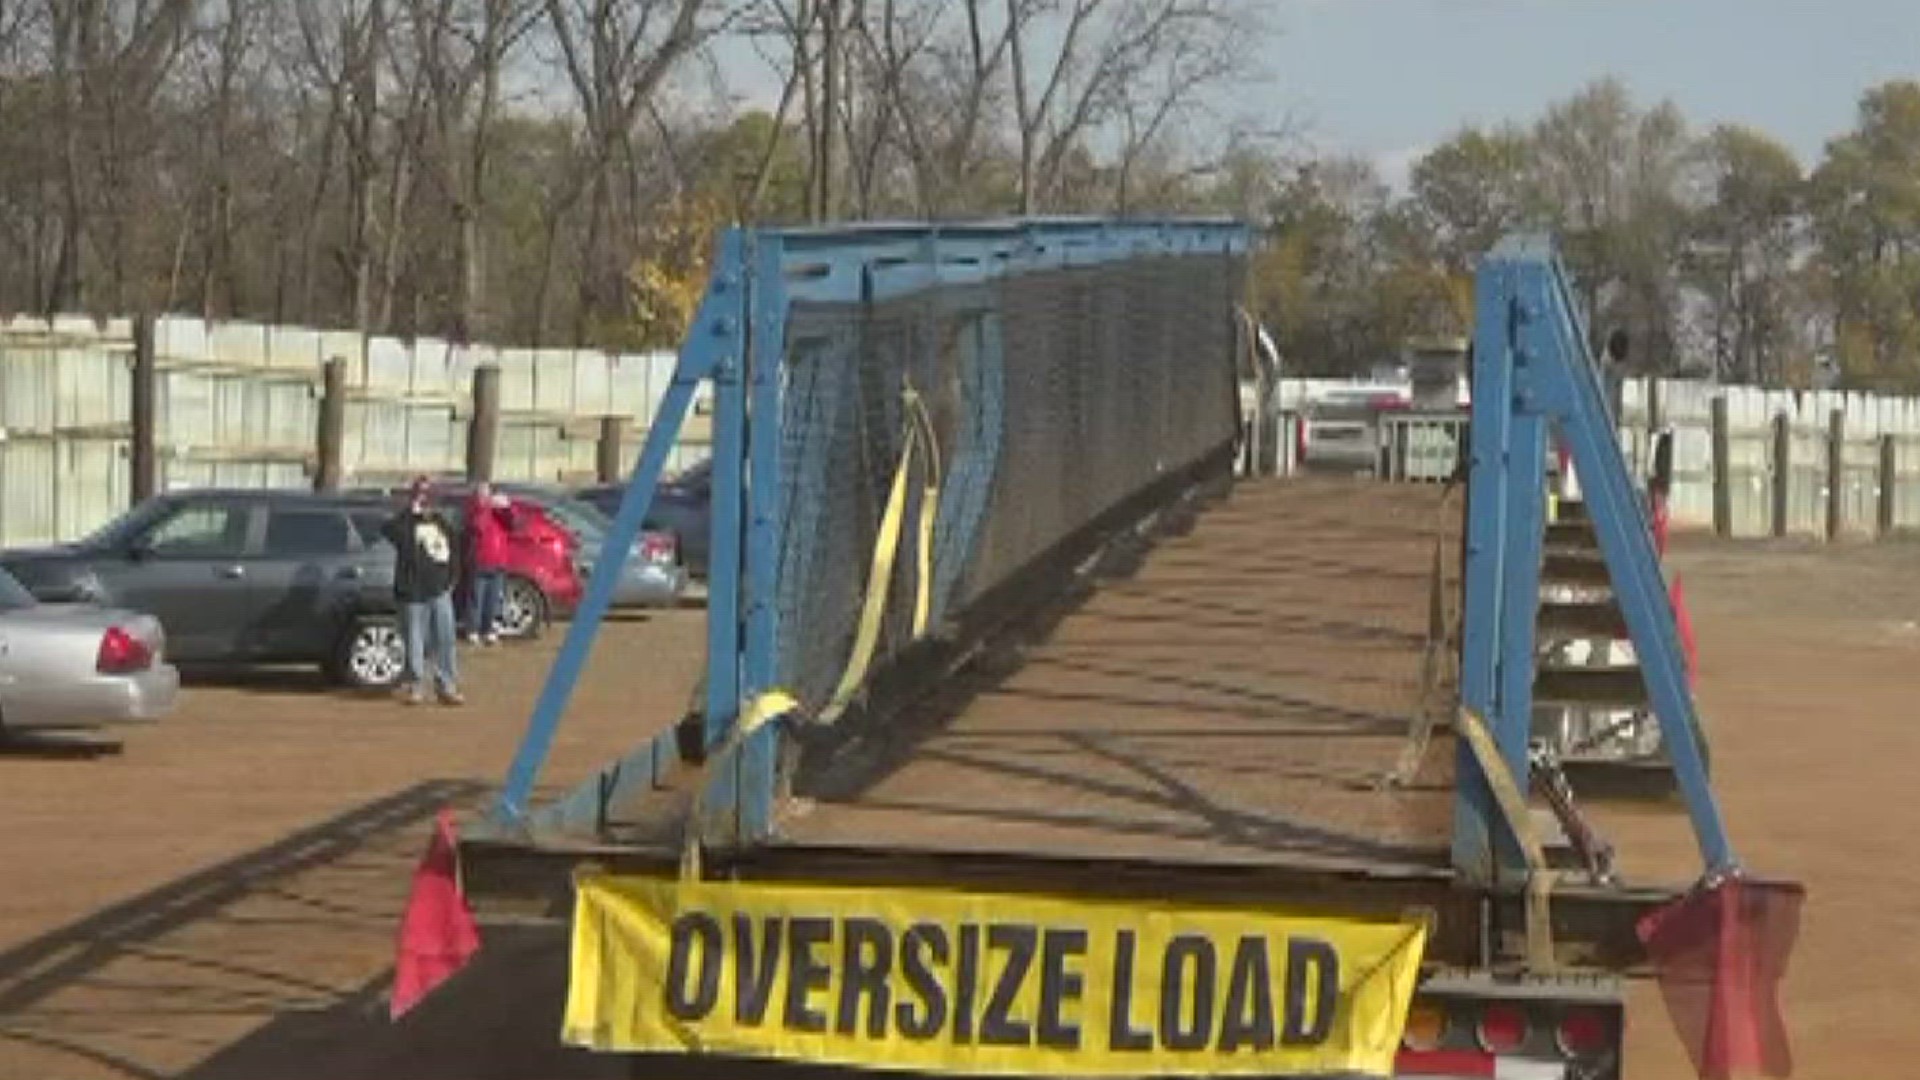 After 76 years, the historic Williams Grove bridge was taken down and donated to the Eastern Museum of Motor Racing.